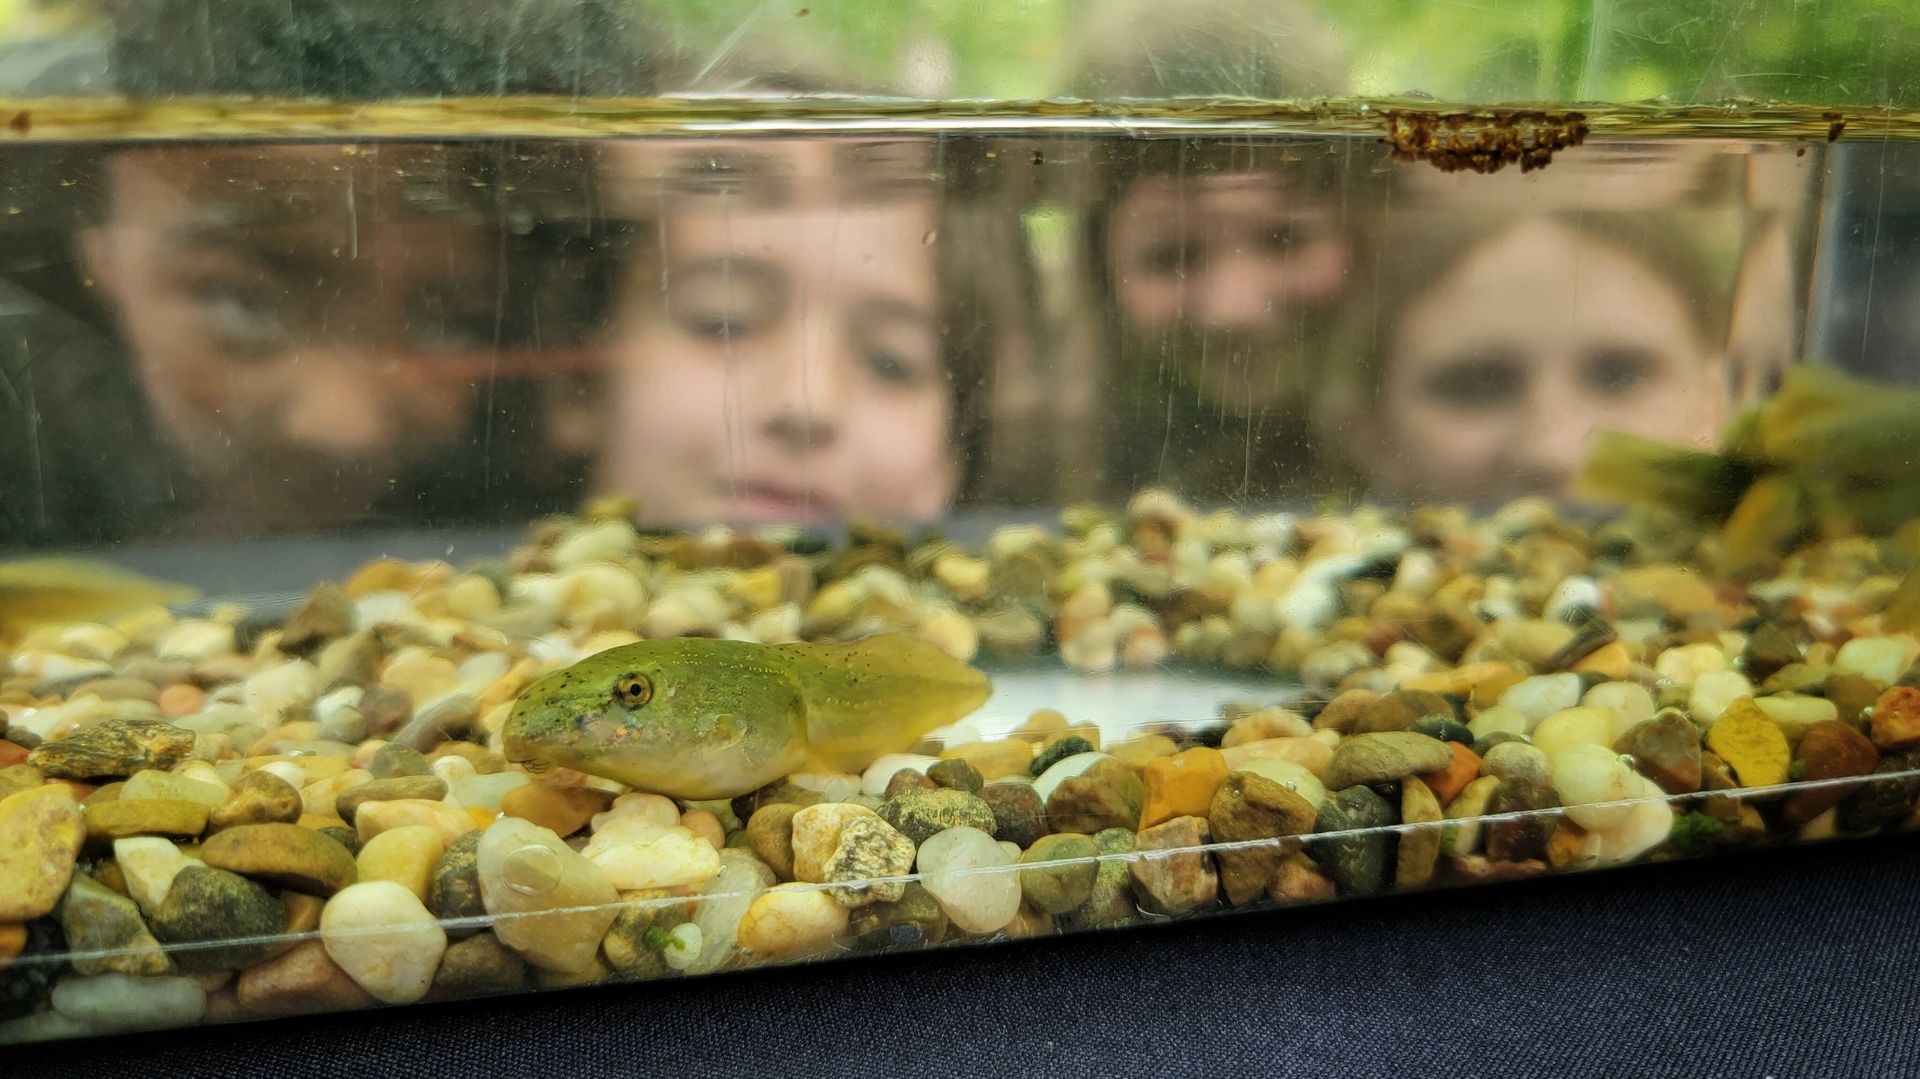 A group of children view a tadpole in a tank.